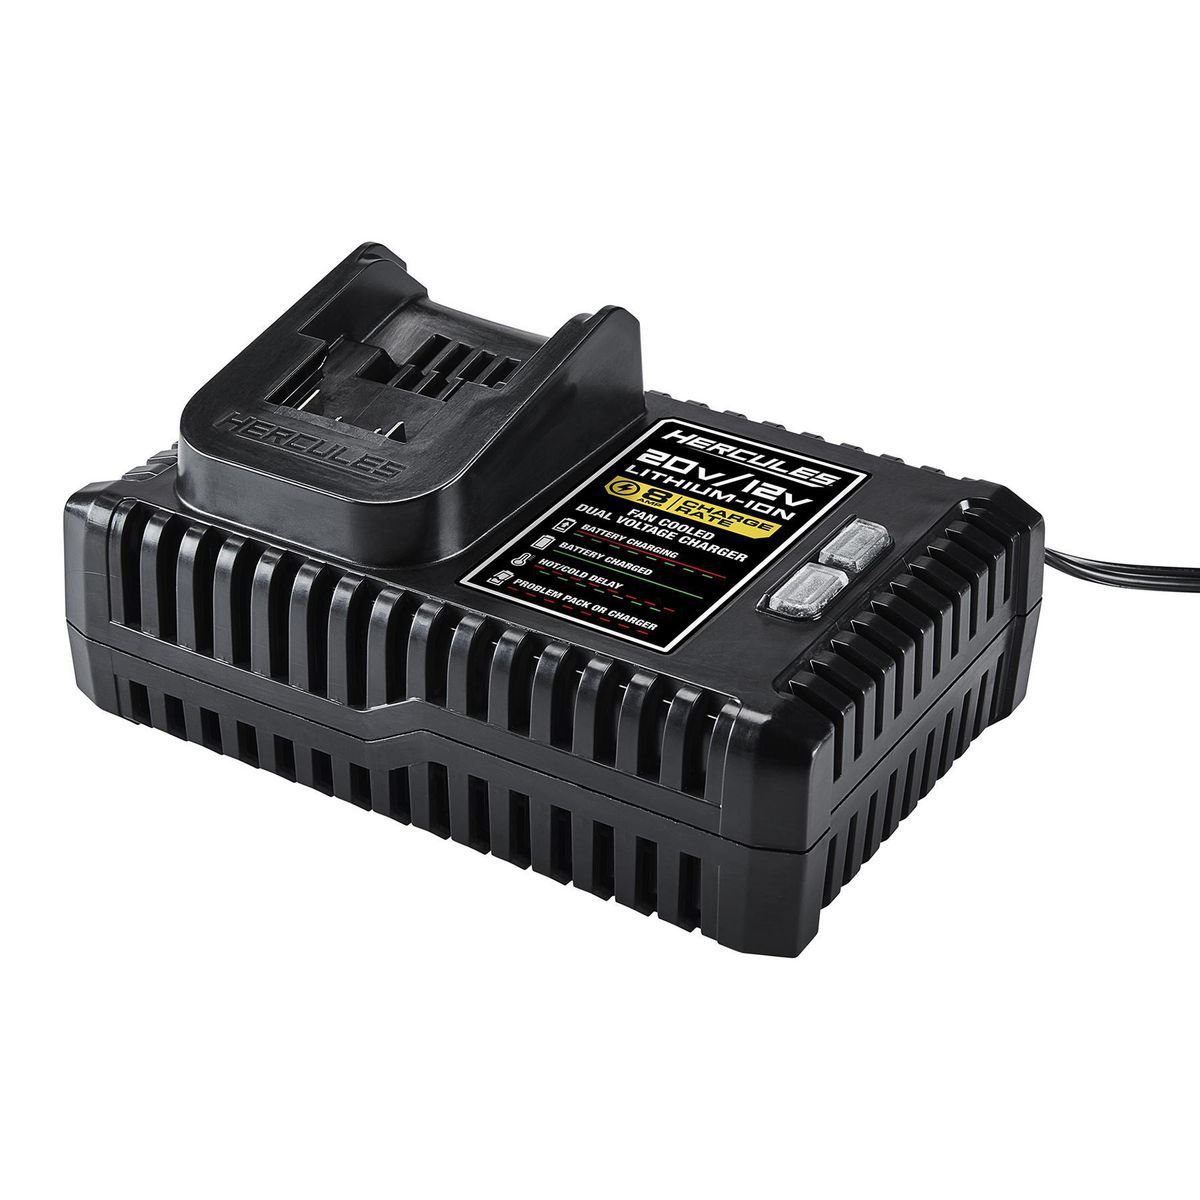 20V/12V Dual Voltage Fan Cooled Lithium-Ion Battery Charger